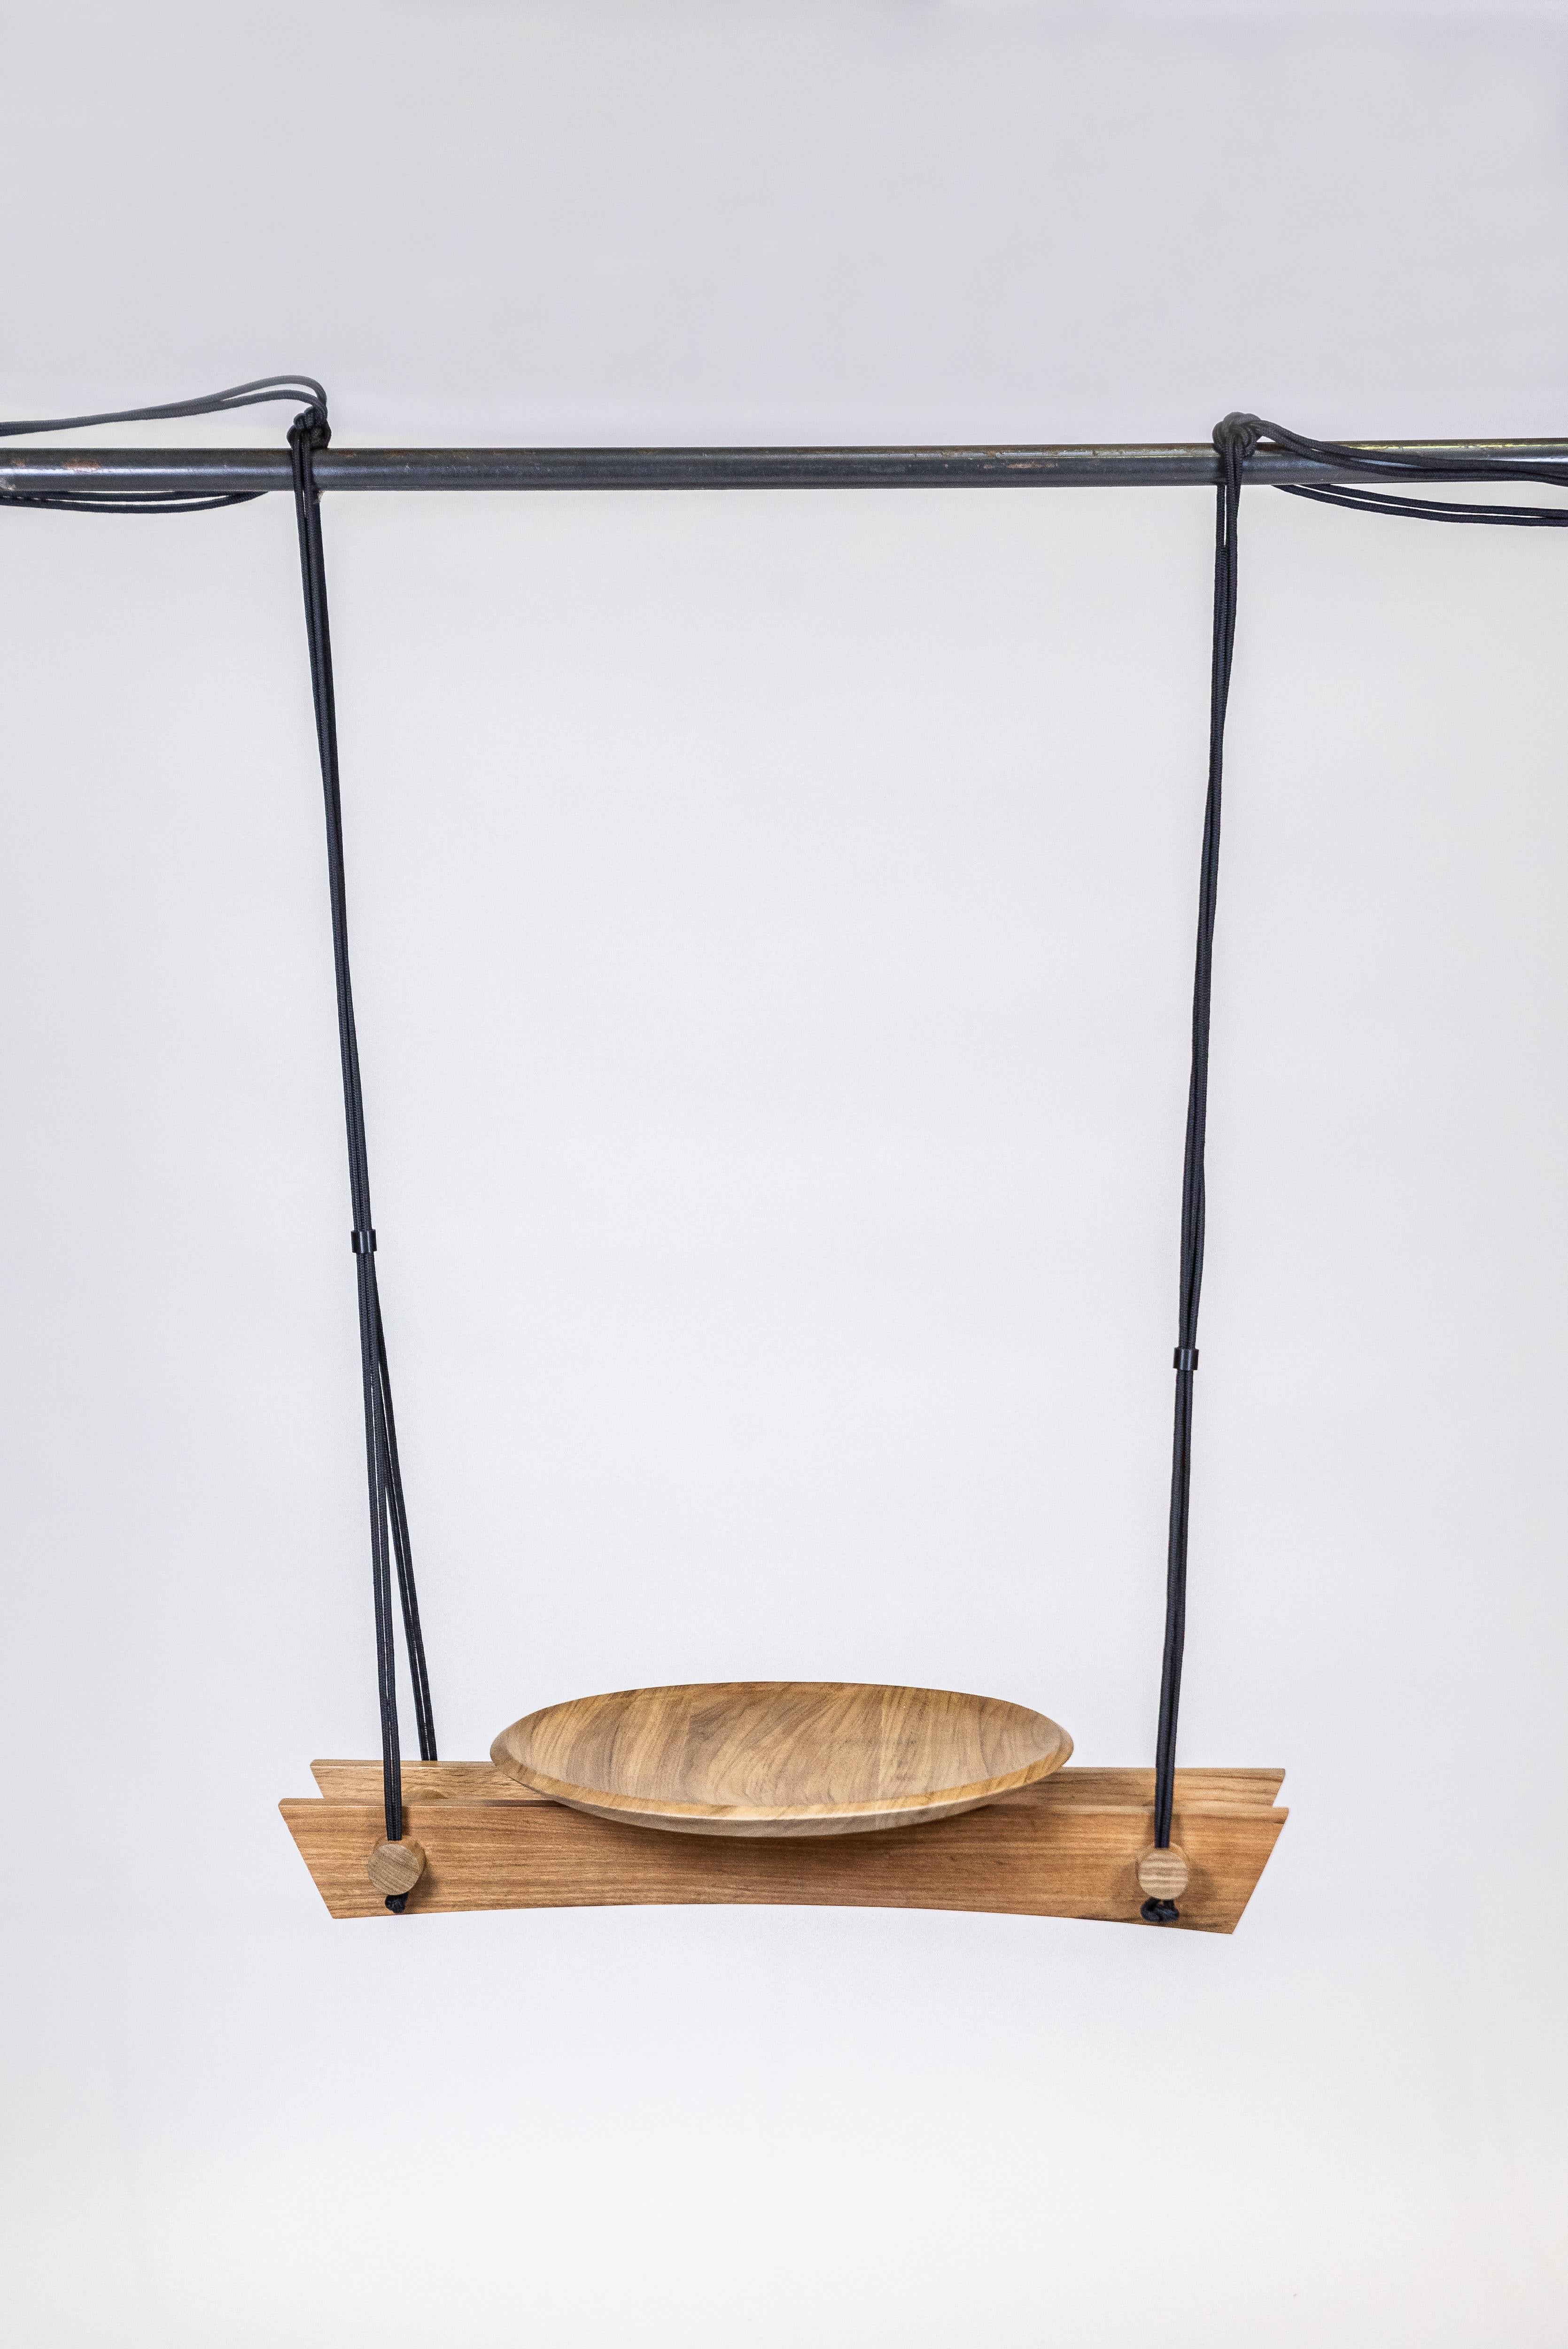 With this finely crafted swing made of Freijo wood, rope and brass, Andre Ferri gives a touch of originality while remaining in his poetic universe of suspended pieces. A touch of lightness, a reminder of childhood but also a reference to the way of